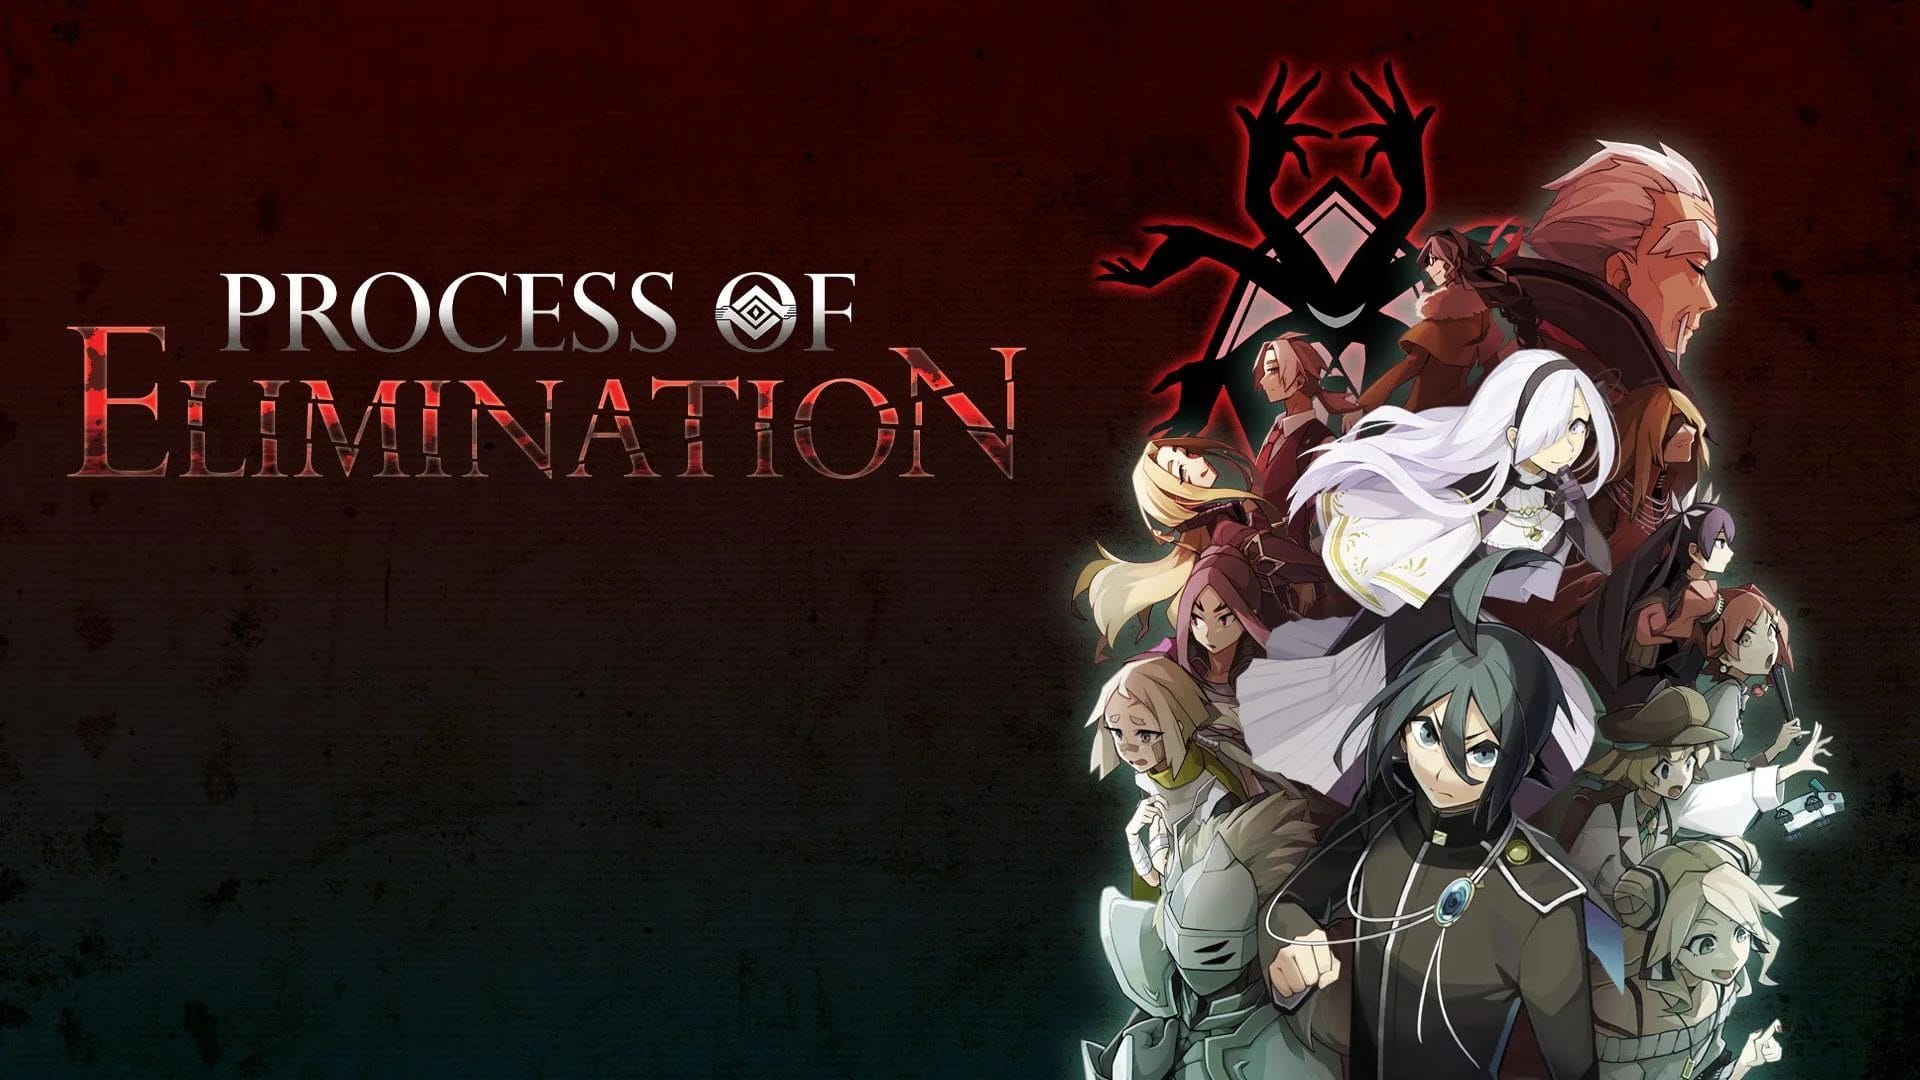 Process of Elimination demo